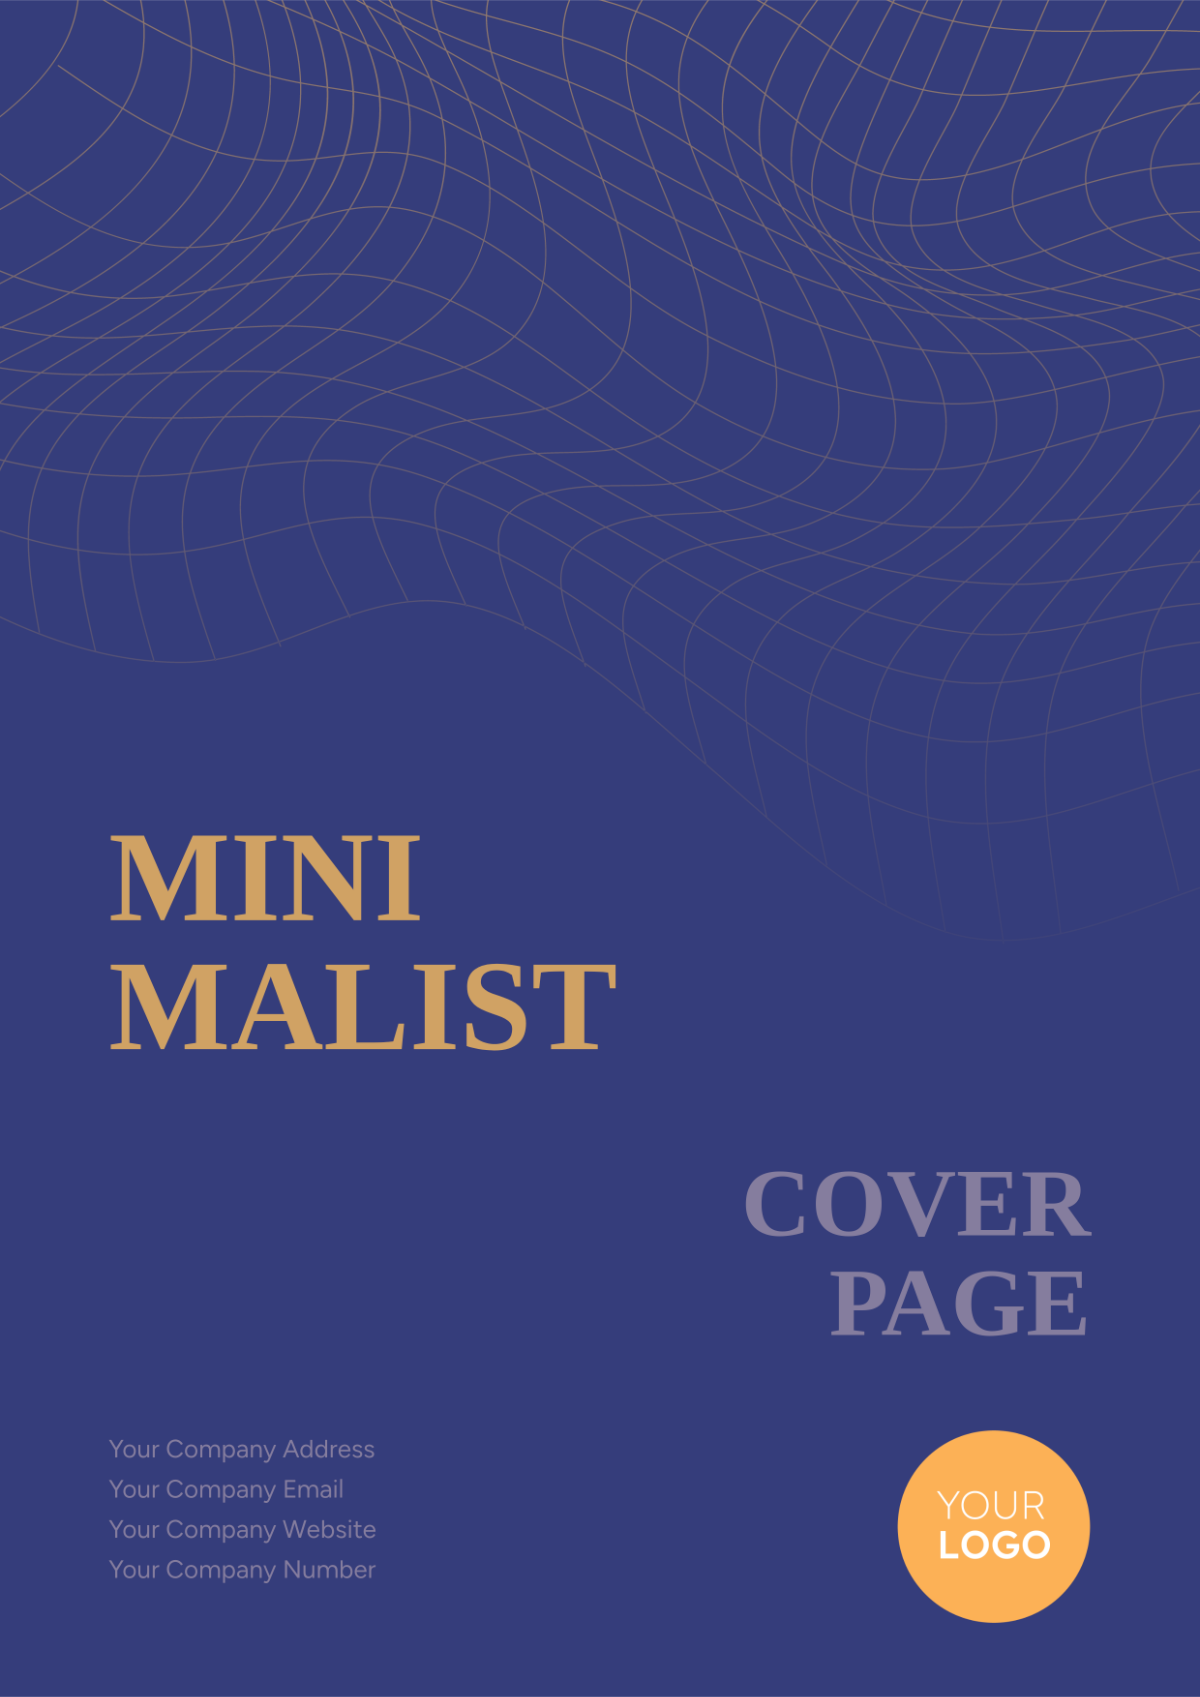 Minimalist Title Cover Page